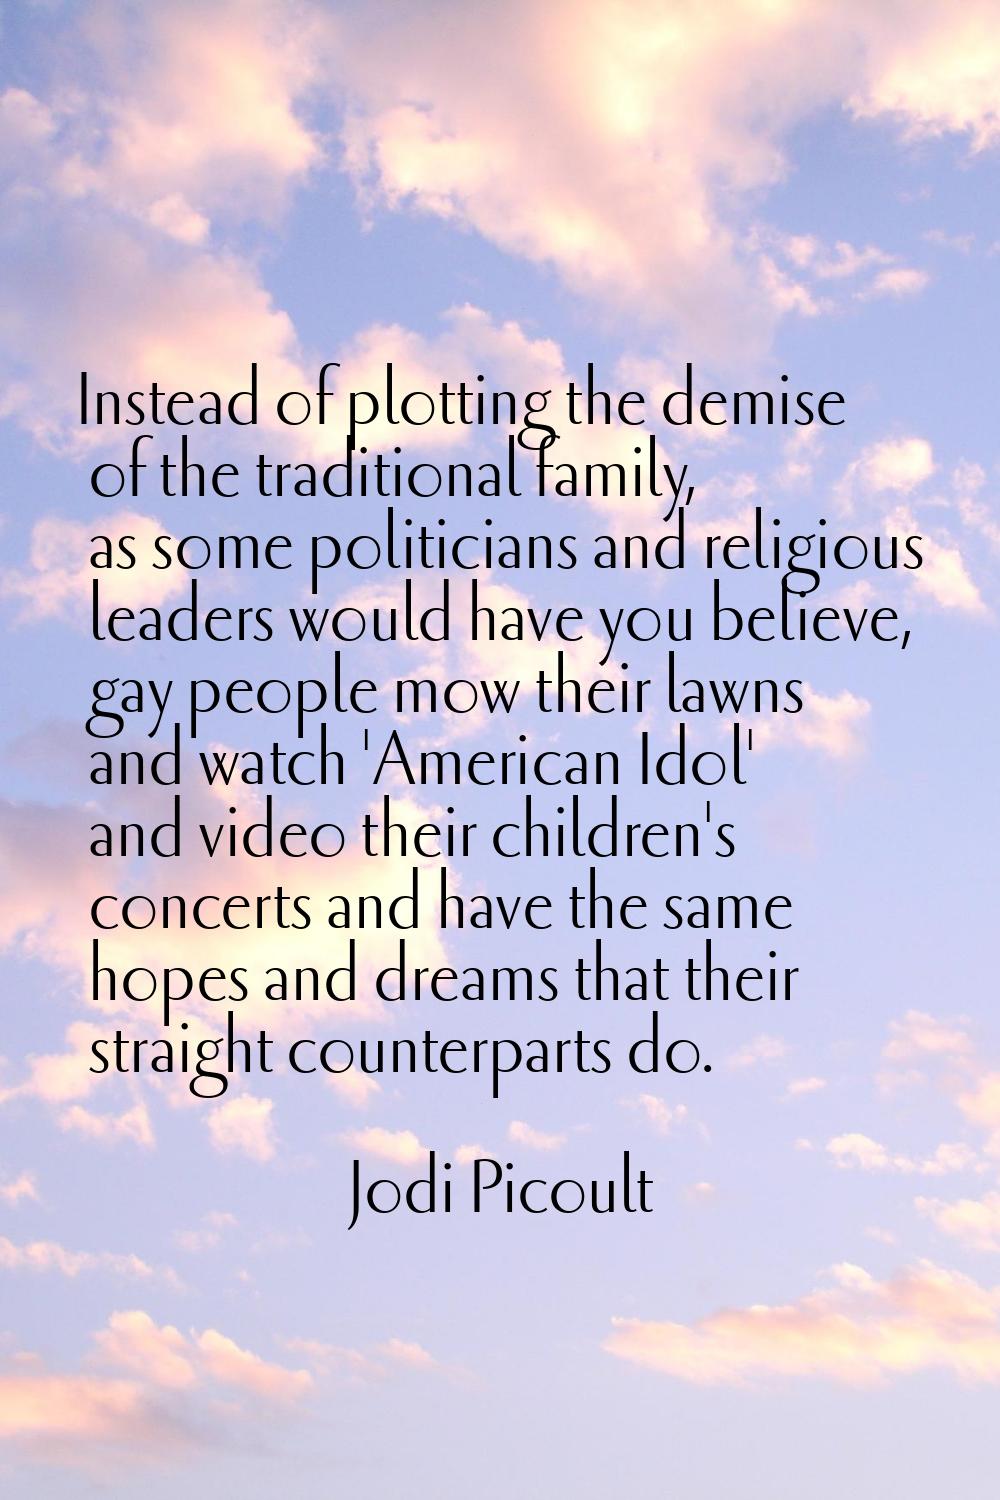 Instead of plotting the demise of the traditional family, as some politicians and religious leaders